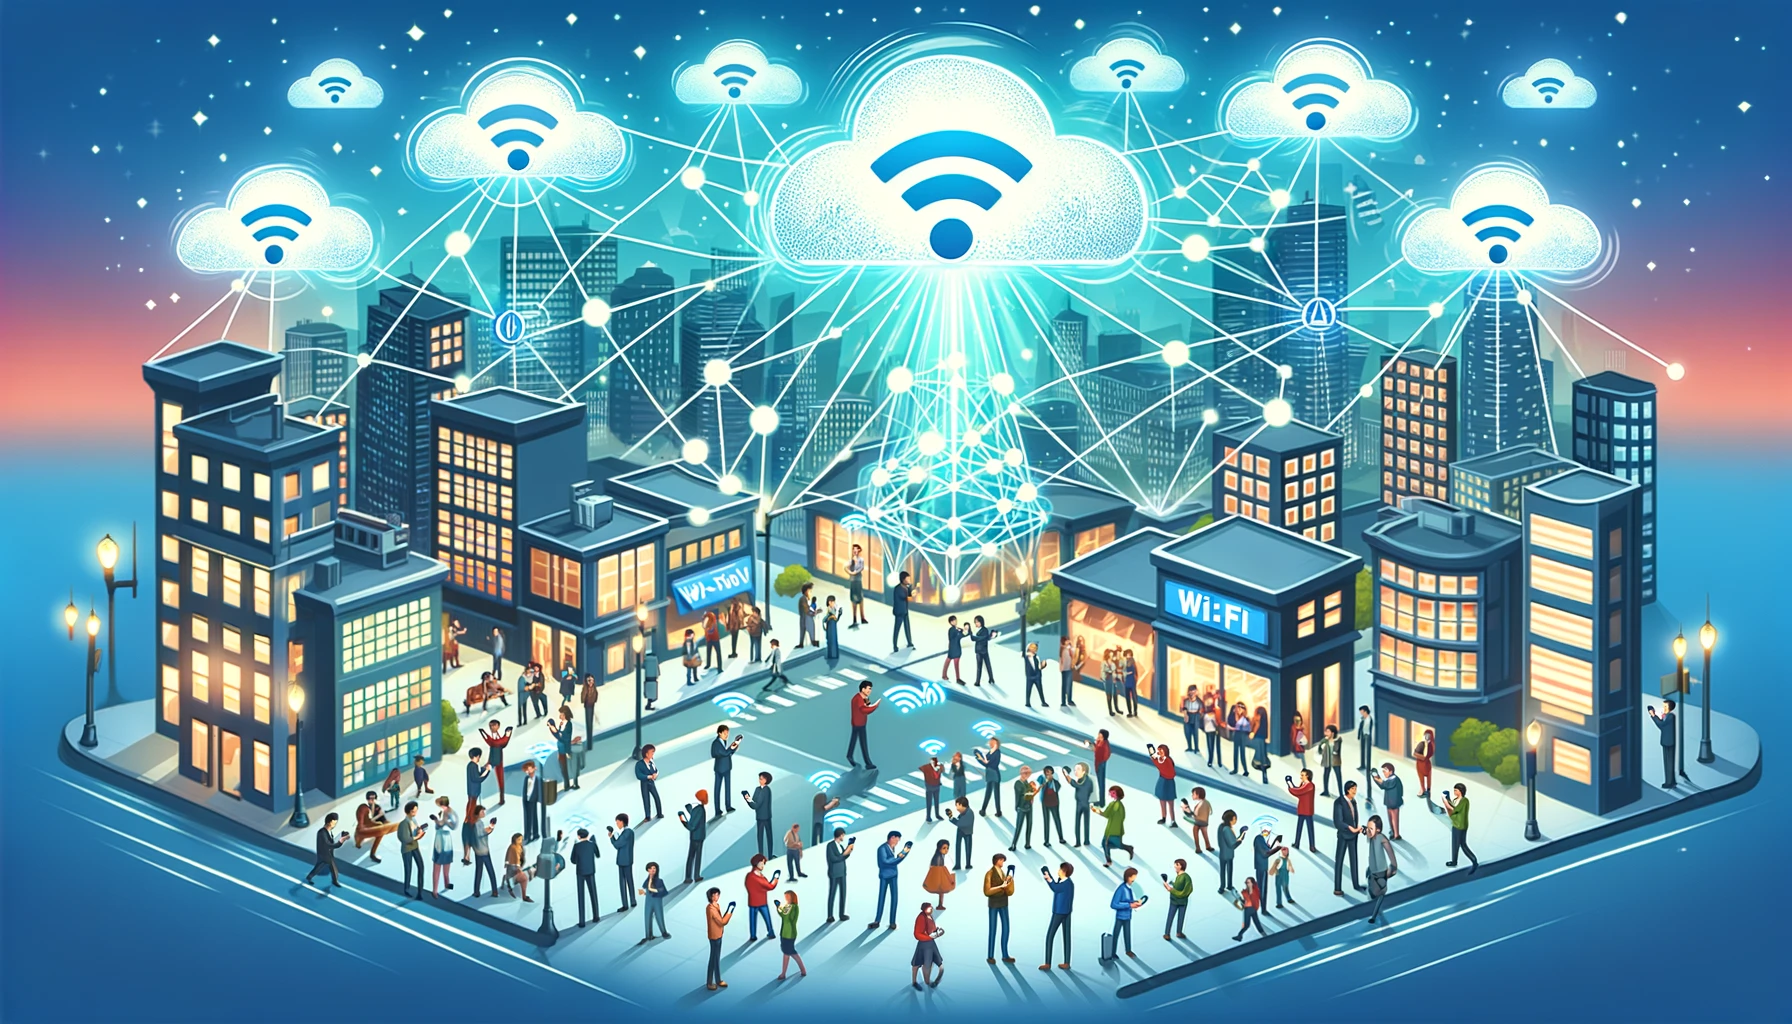 A cartoon-style image depicting a busy cityscape with various people using smartphones connected to strategically placed Wi-Fi symbols representing XNET access points, all seamlessly interconnected with glowing lines. The sky above shows digital clouds shaped like network icons.